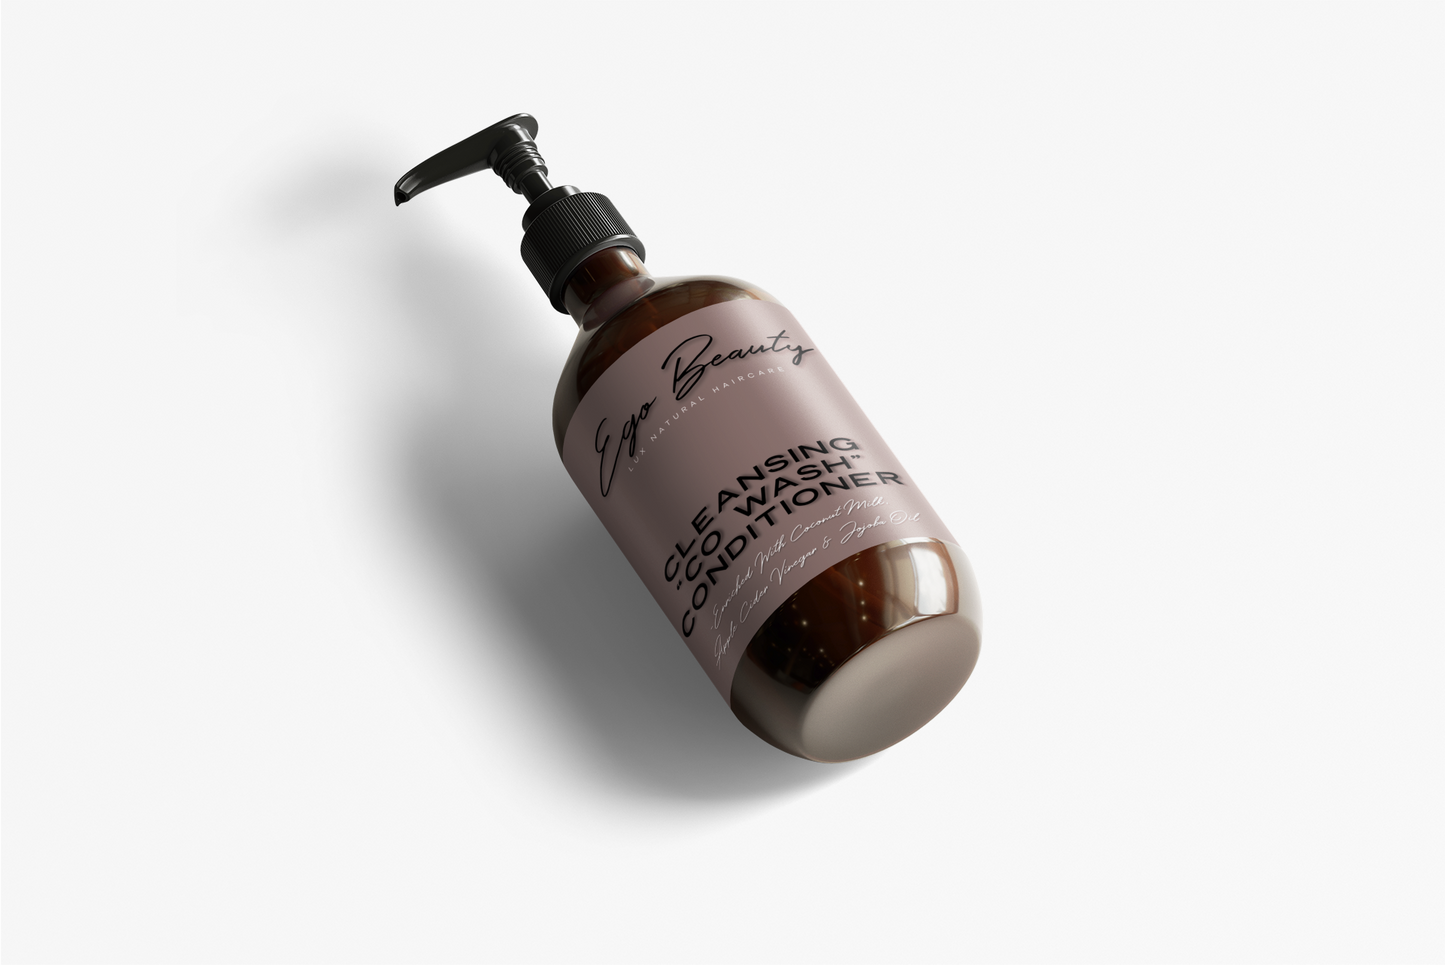 Cleansing “Co Wash” Conditioner